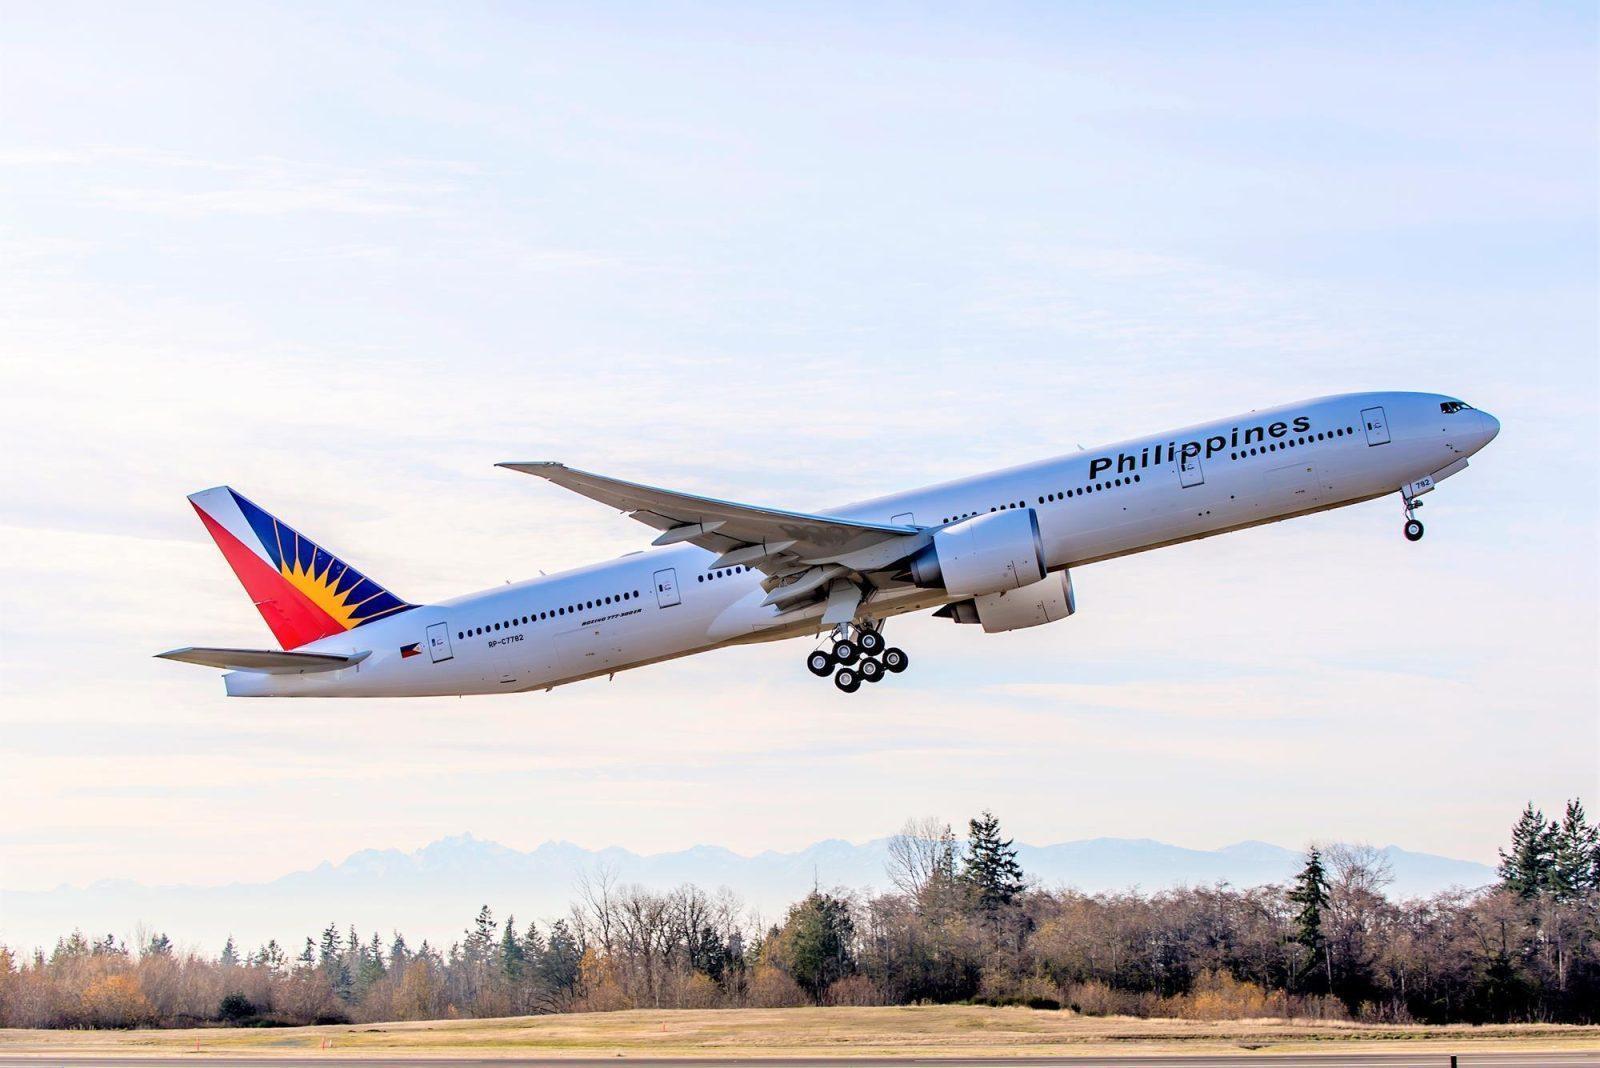 Philippine Airlines Extends AFI KLM E&M Contract for 777 and A320 Engines